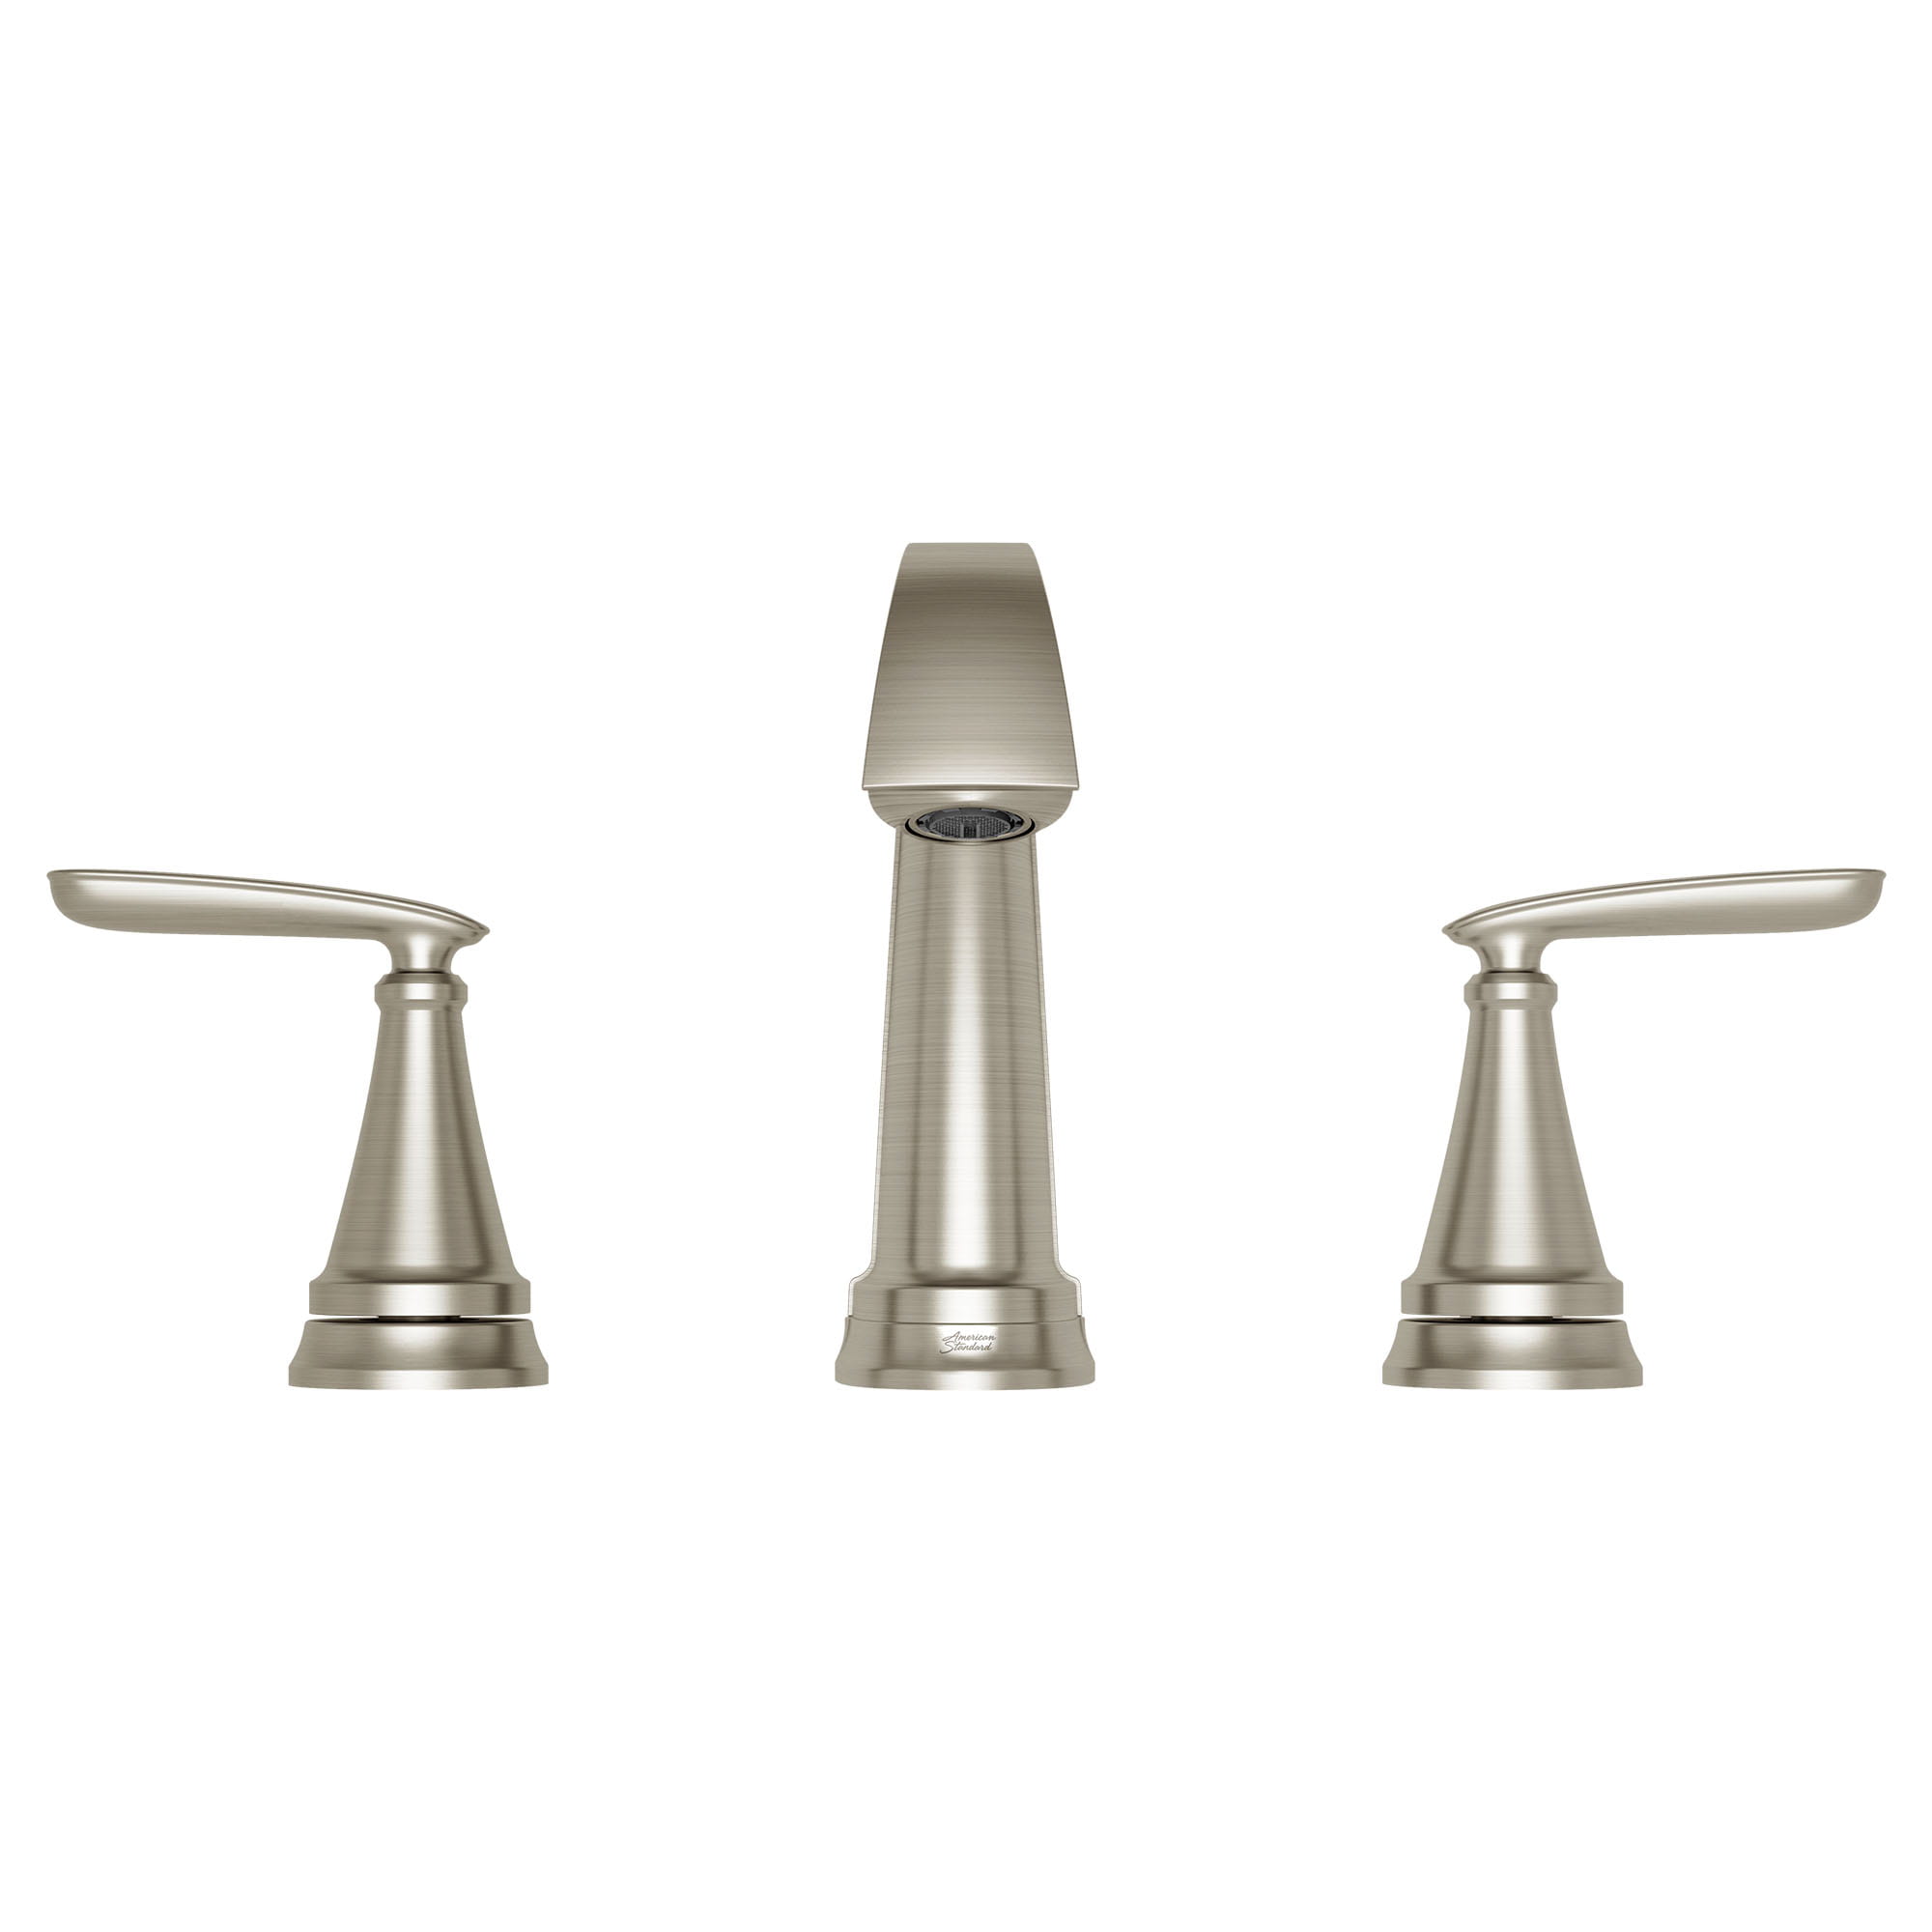 Somerville 8 In Widespread 2 Handle Bathroom Faucet 12 GPM with Lever Handles BRUSHED NICKEL